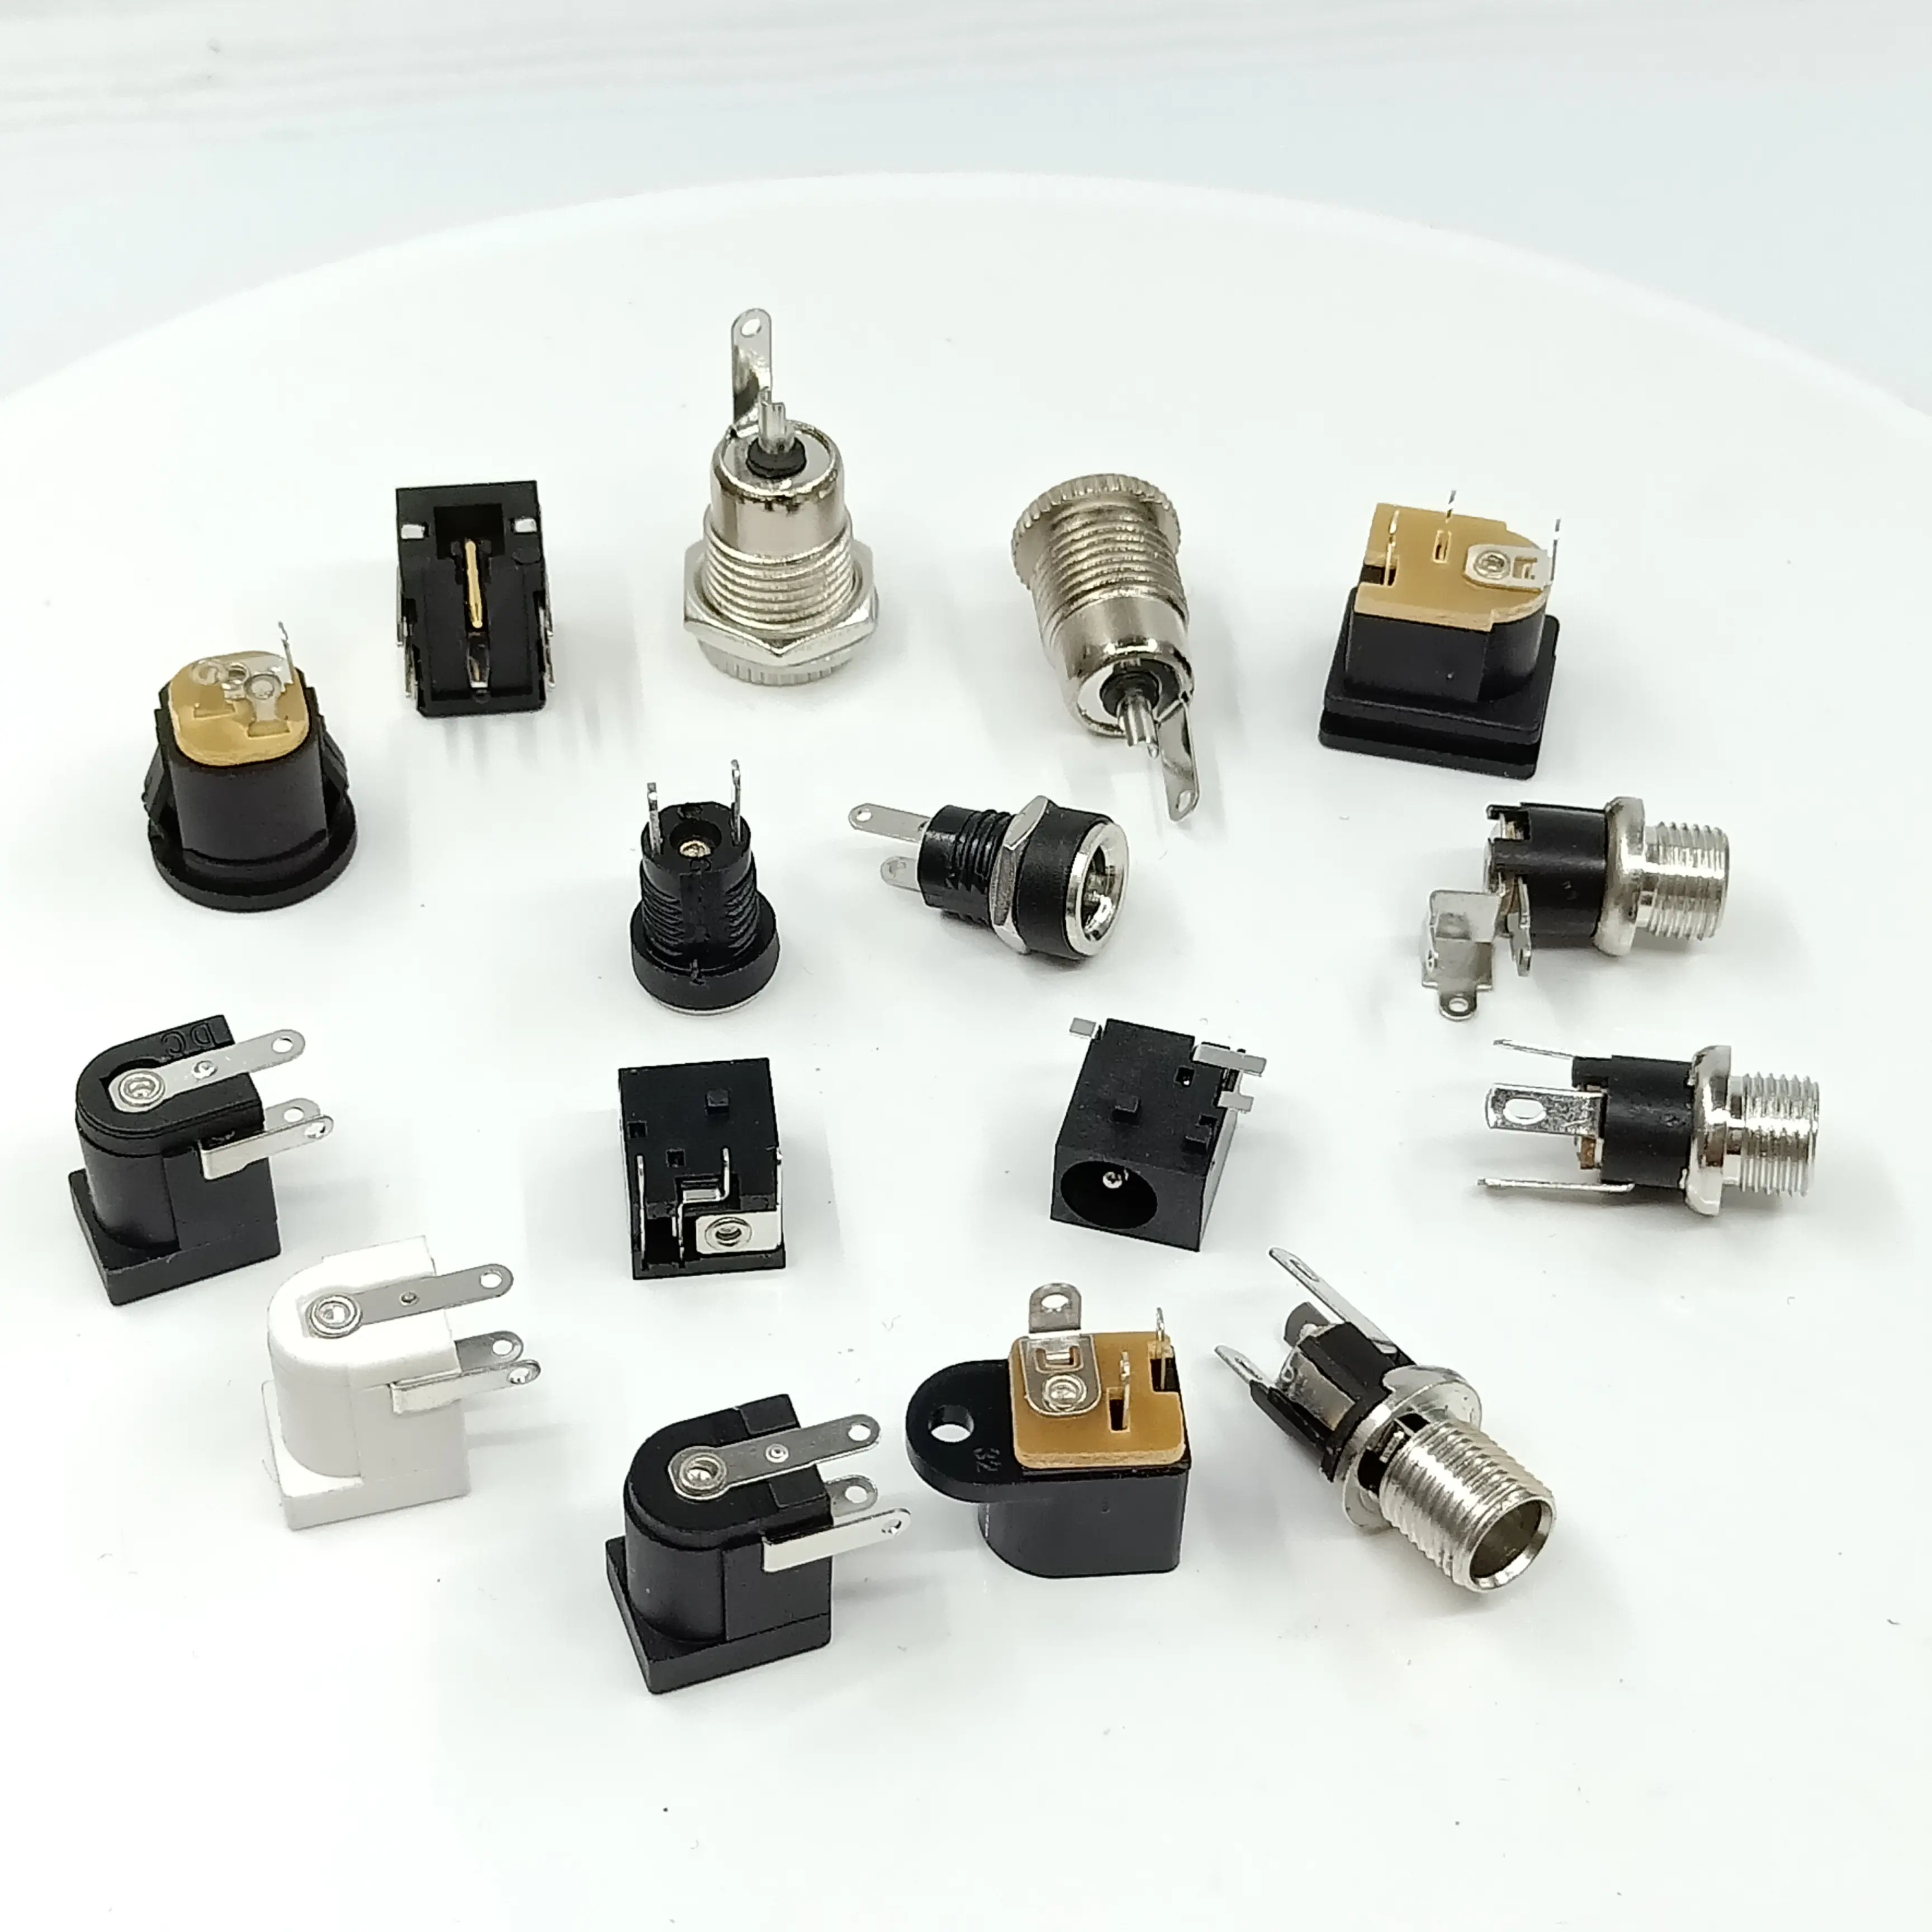 China Connector Factory 2.1mm/ 2.5mm 5.5mm dc power jack socket, dc power jack, dc power jack plug adapter